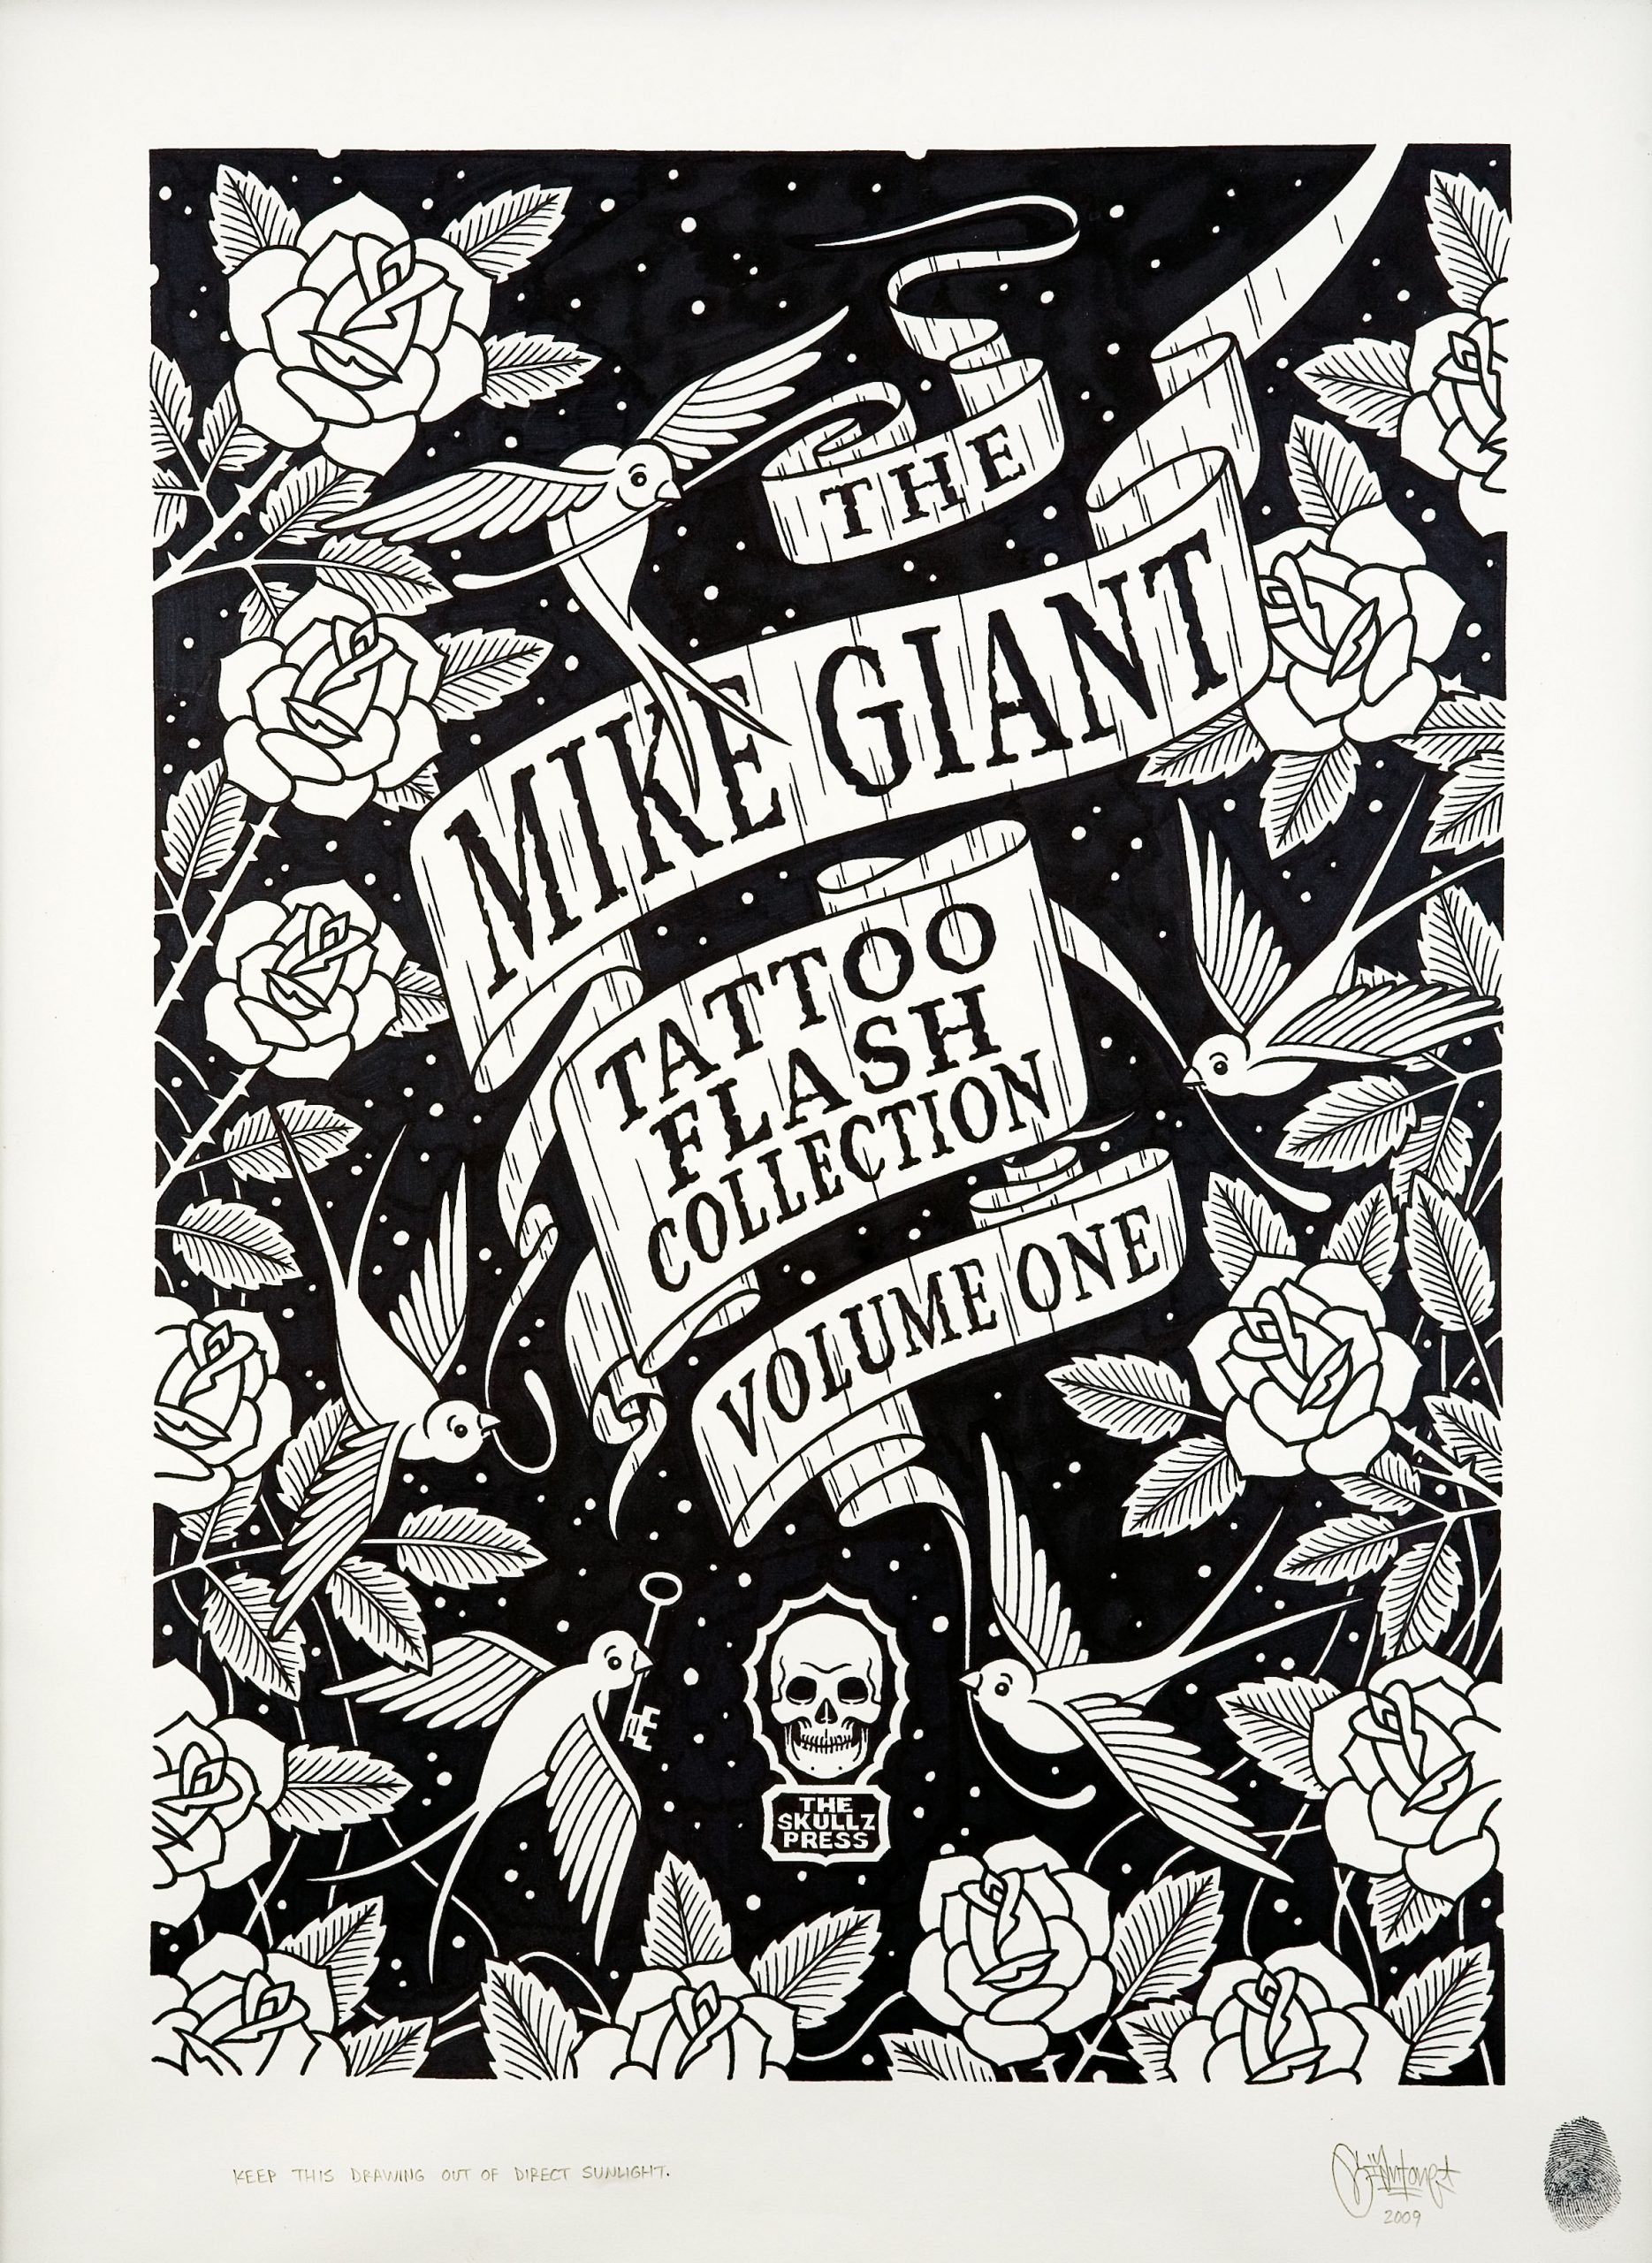 Mike Giant, The Mike Giant Tattoo Flash Collection, 2009, china su carta, 61x46cm